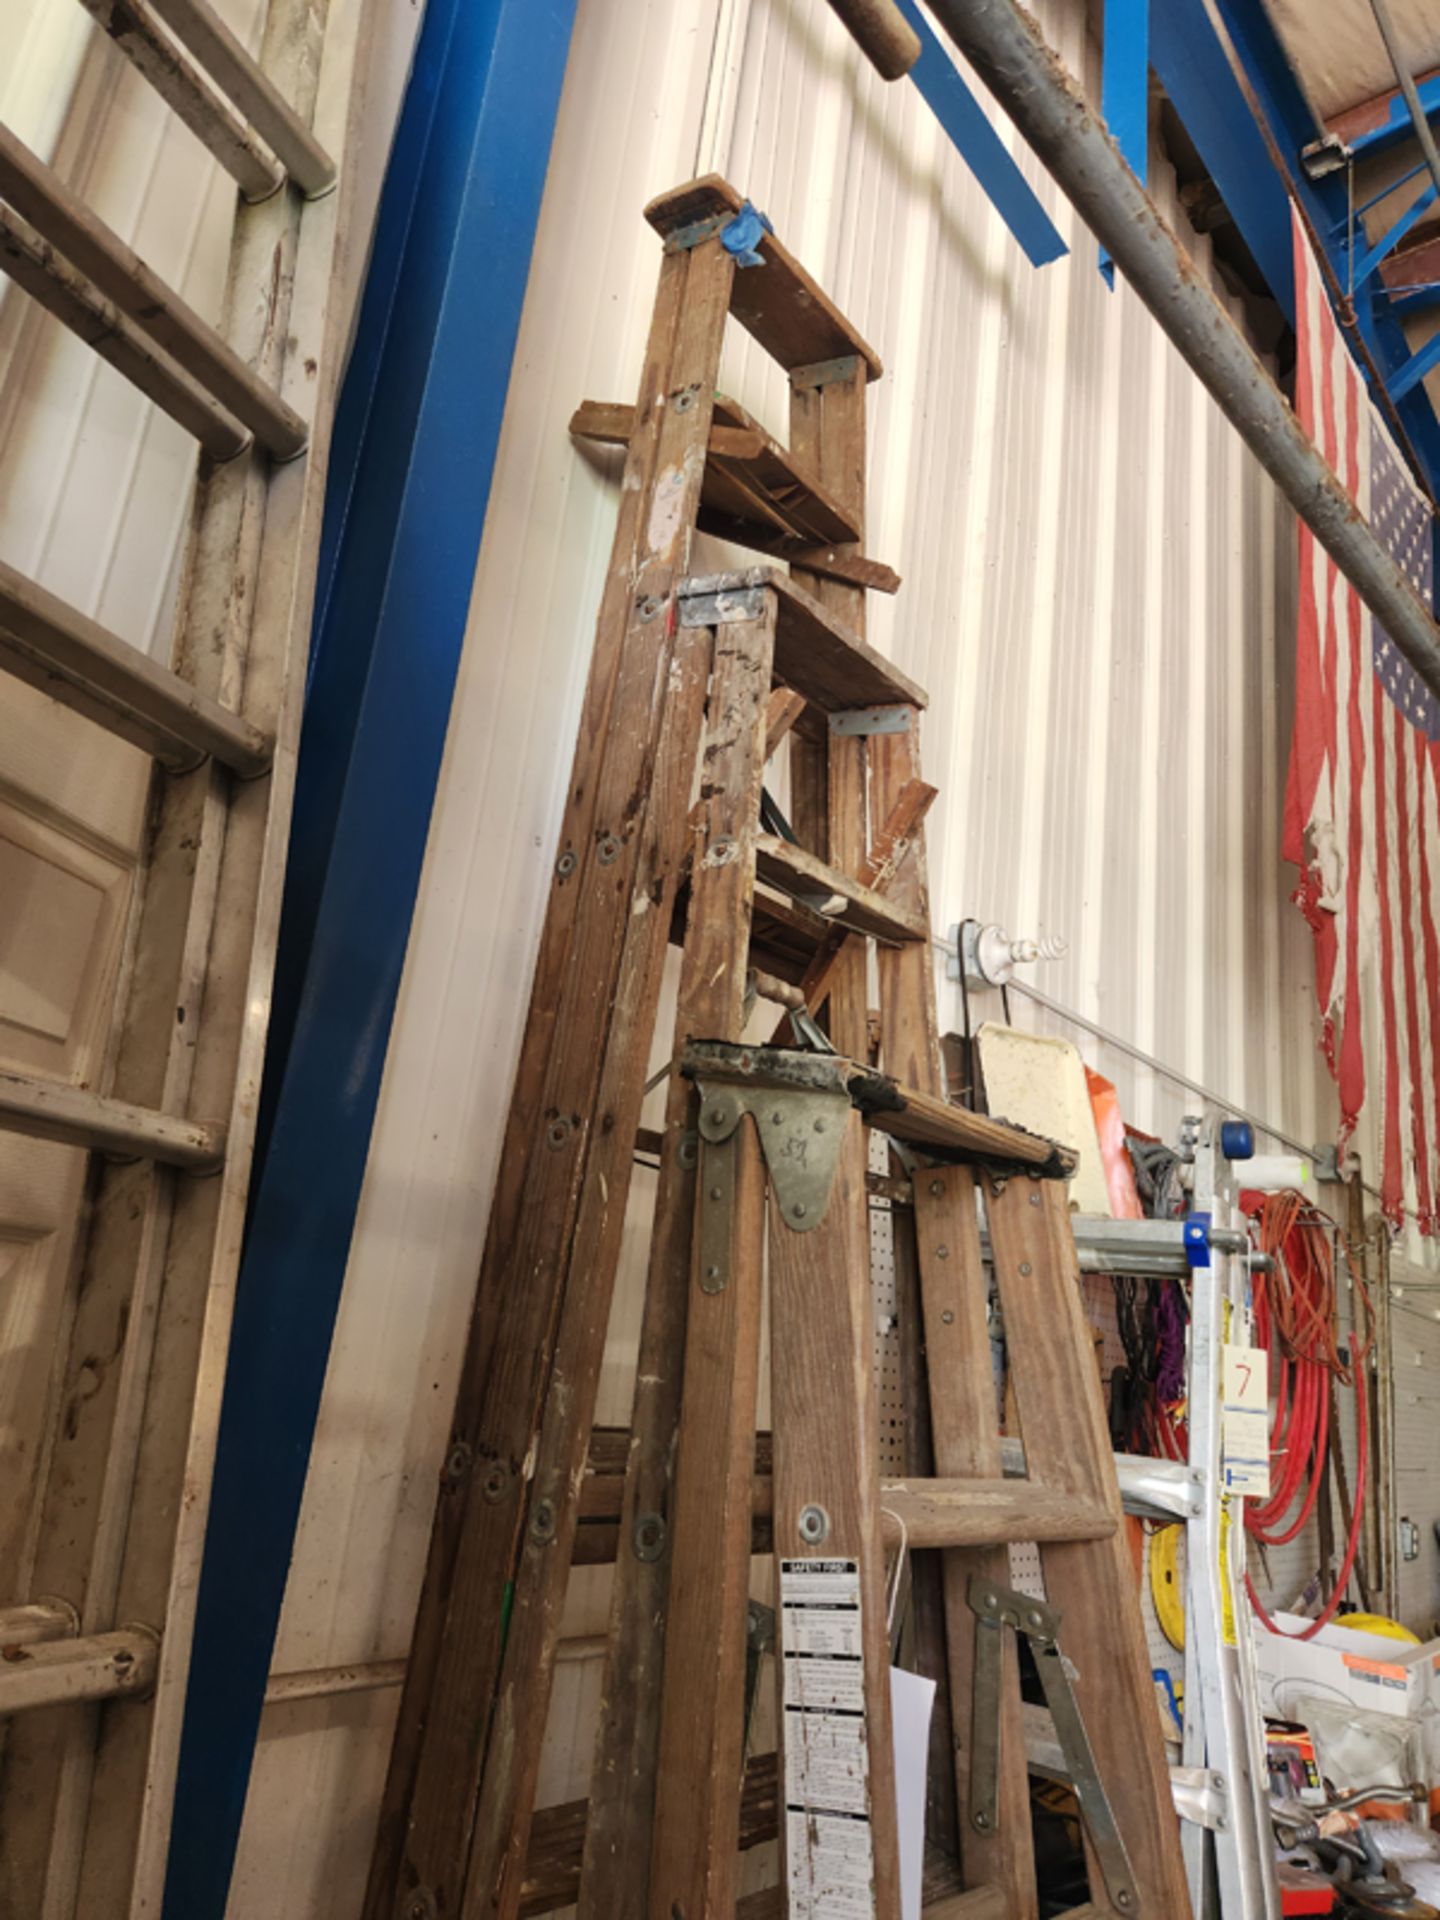 SET OF 3 WOODEN LADDERS - 6', 8' AND 10' - Image 3 of 3